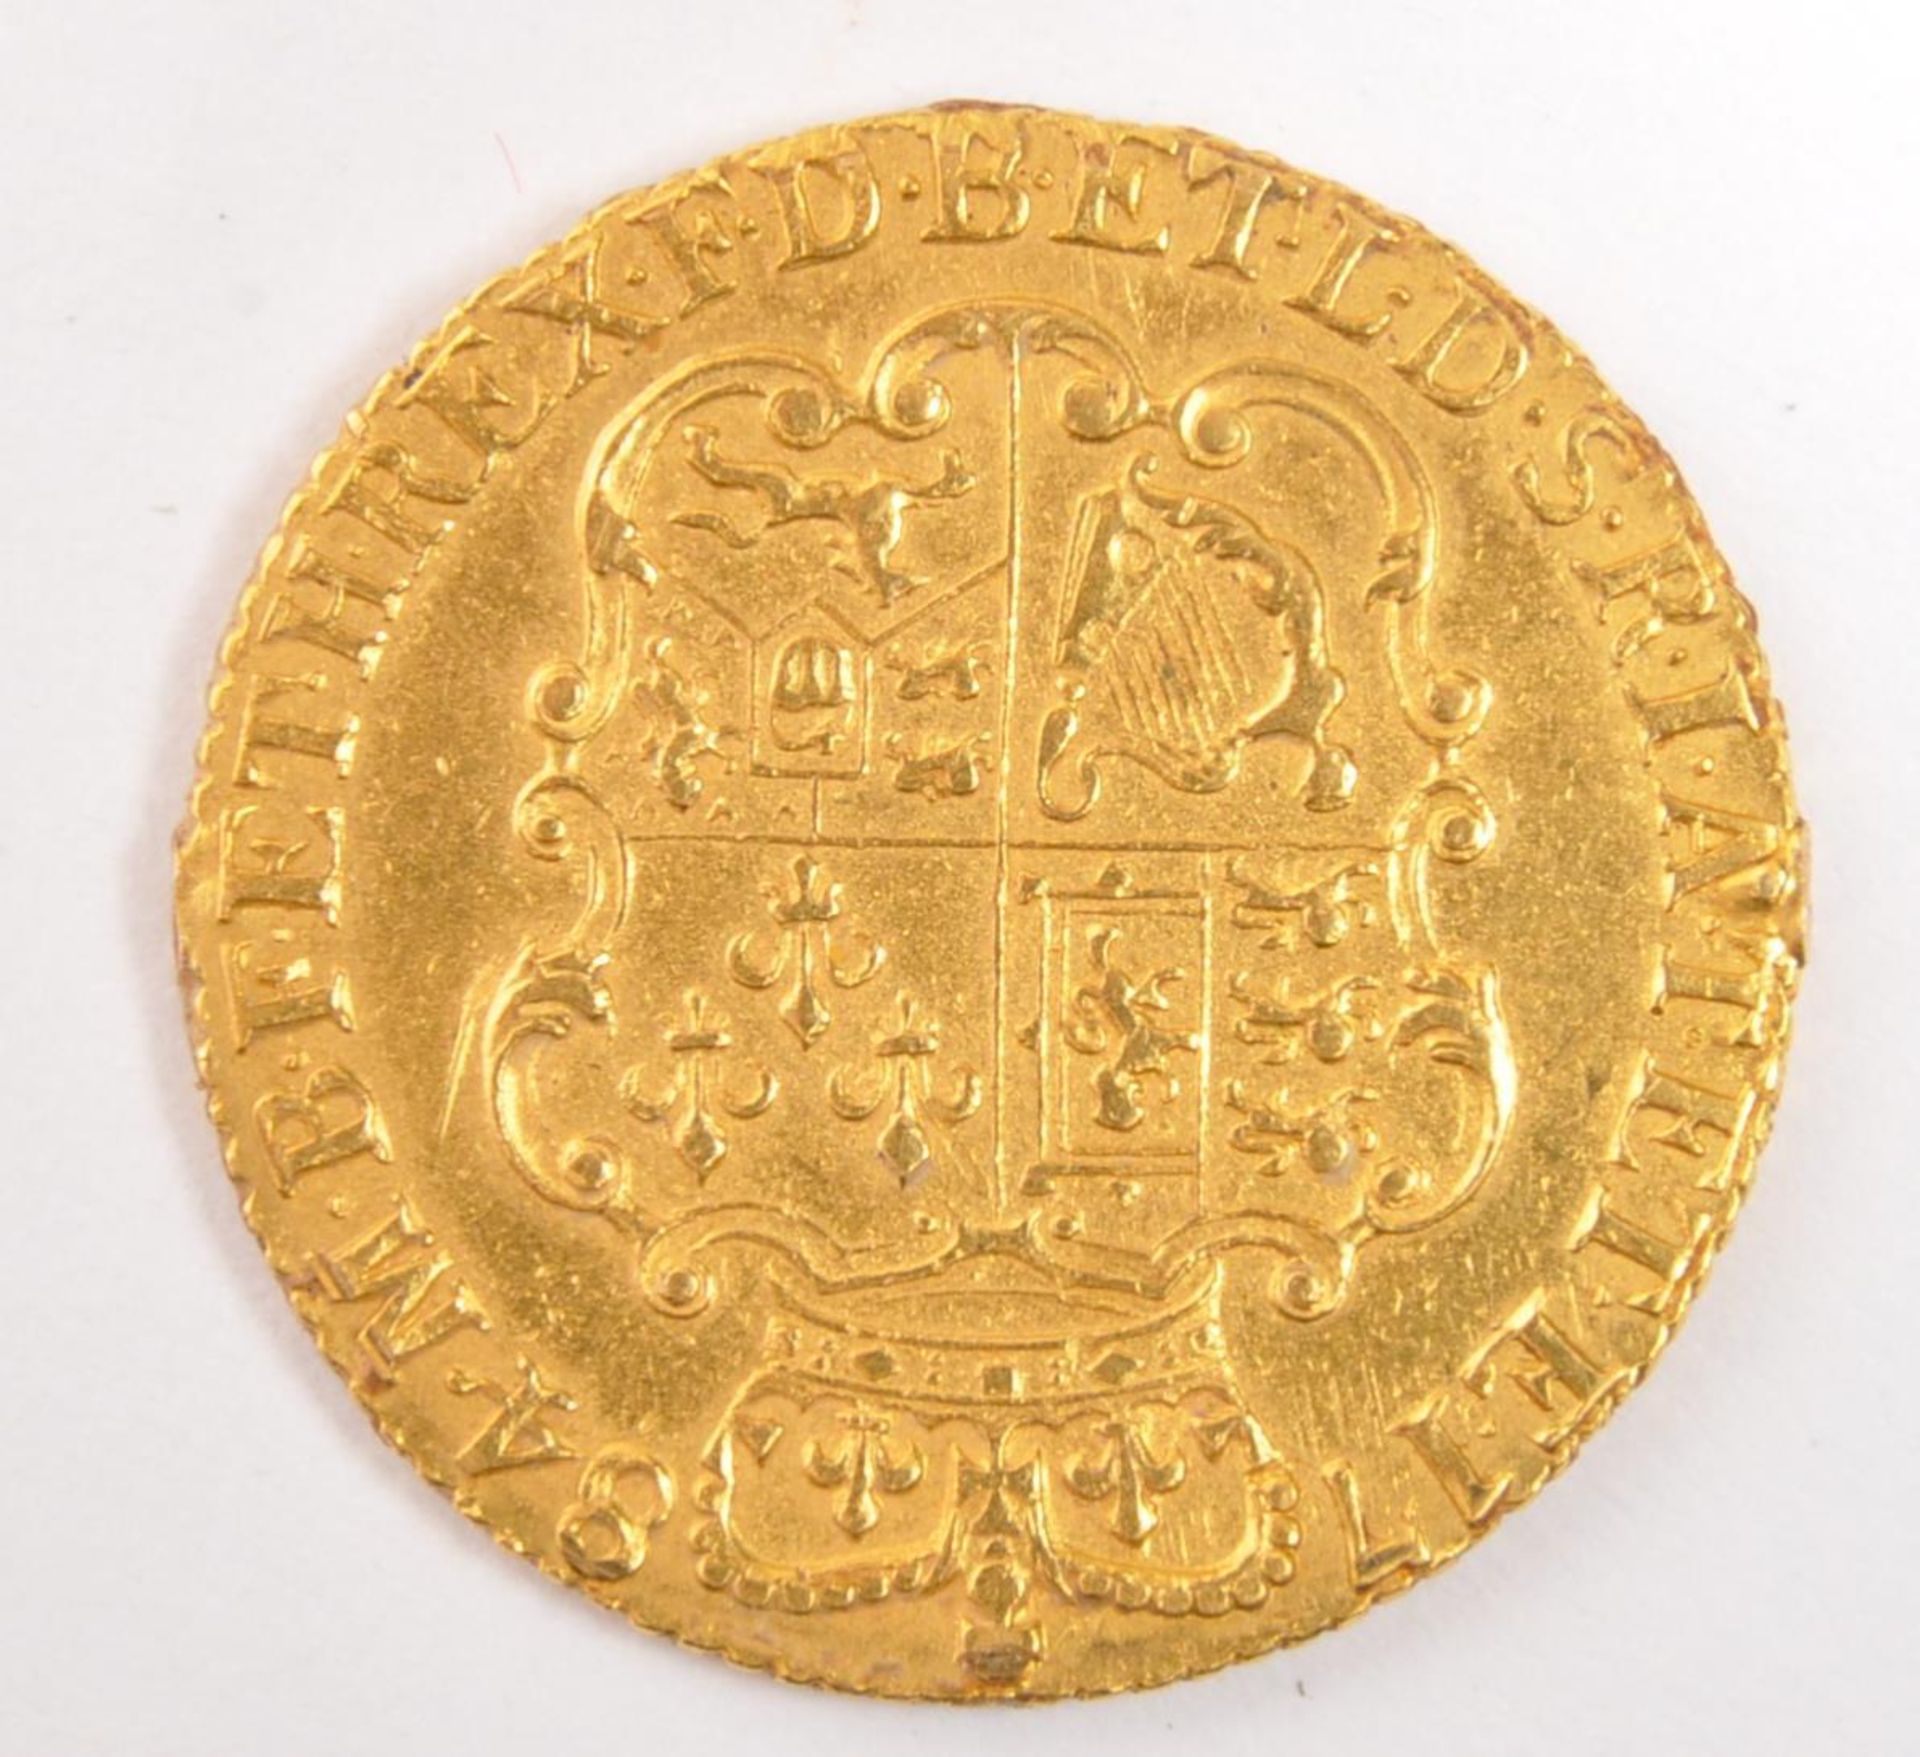 GEORGE III - GOLD GUINEA 1784 - GREAT BRITAIN COIN